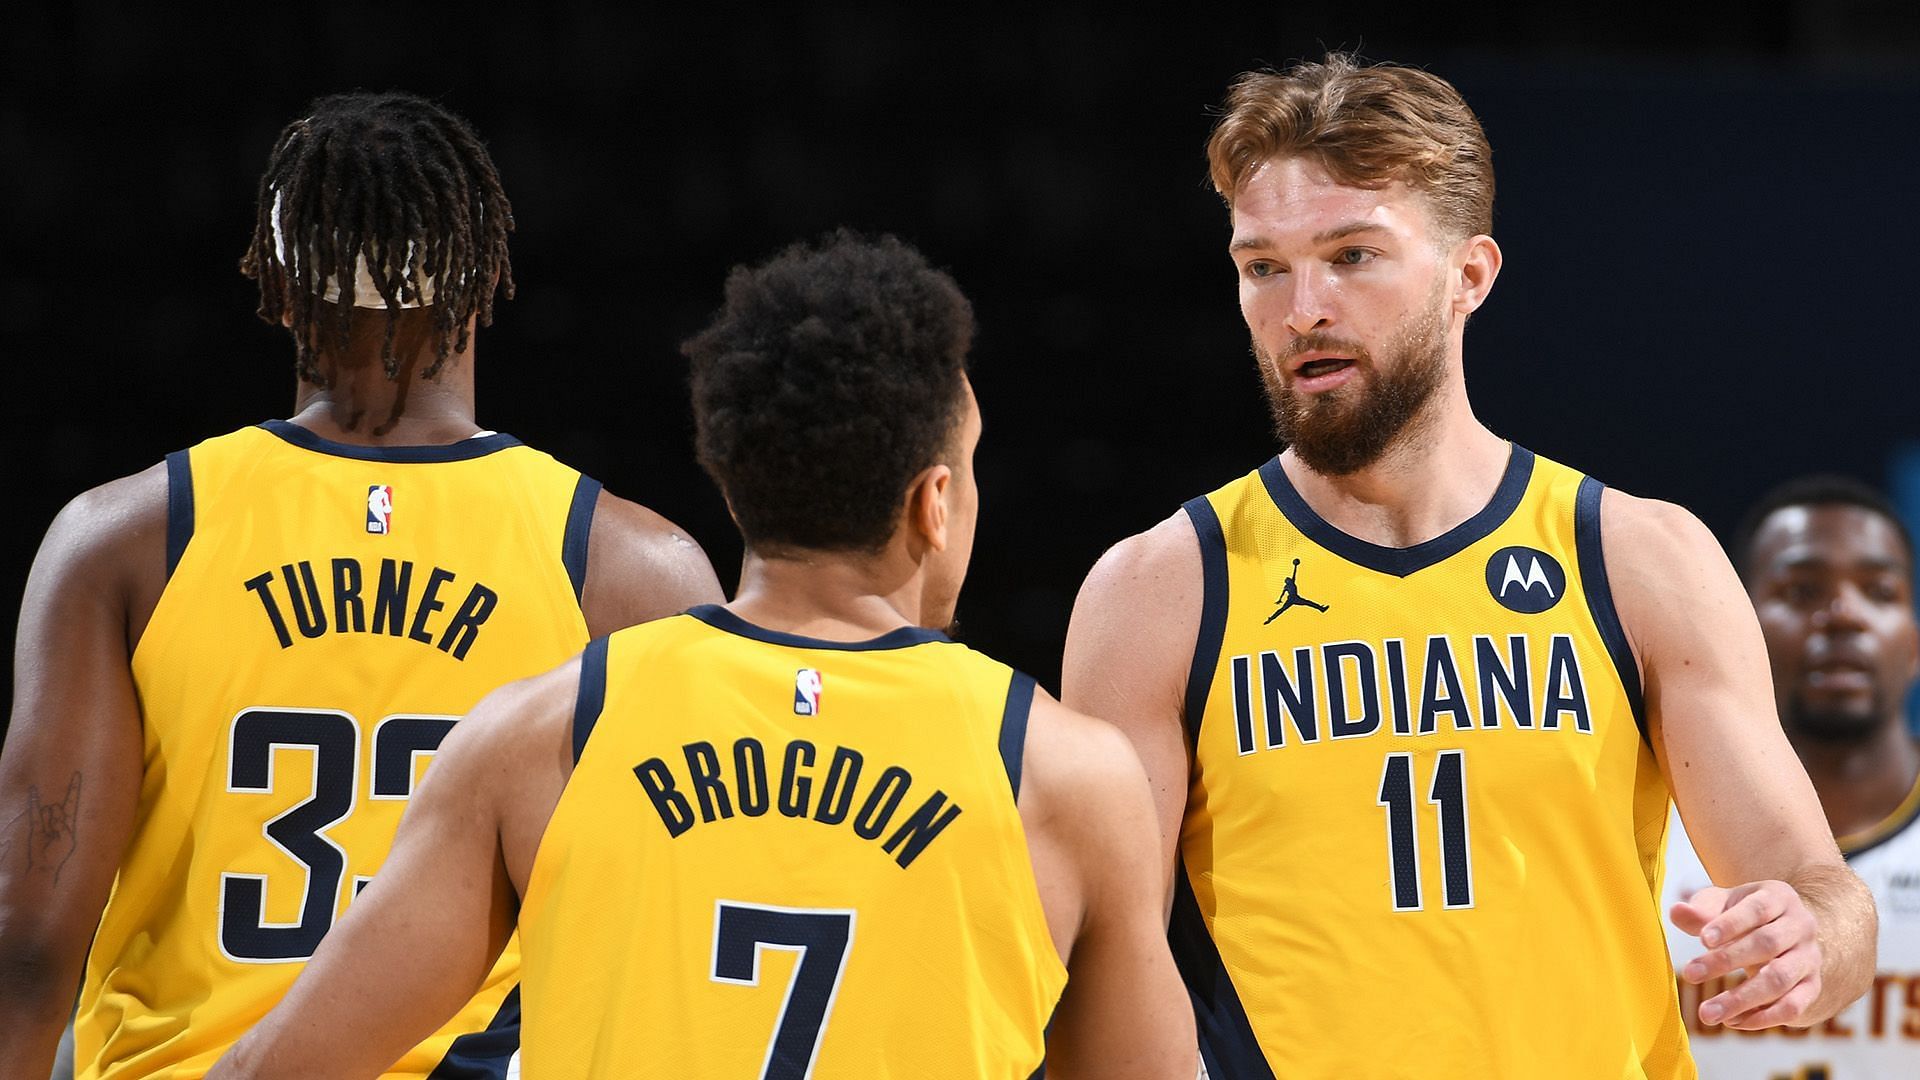 The Indiana Pacers have been playing quite well in their last few games despite the loss to the Los Angeles Lakers. [Photo: NBA.com]